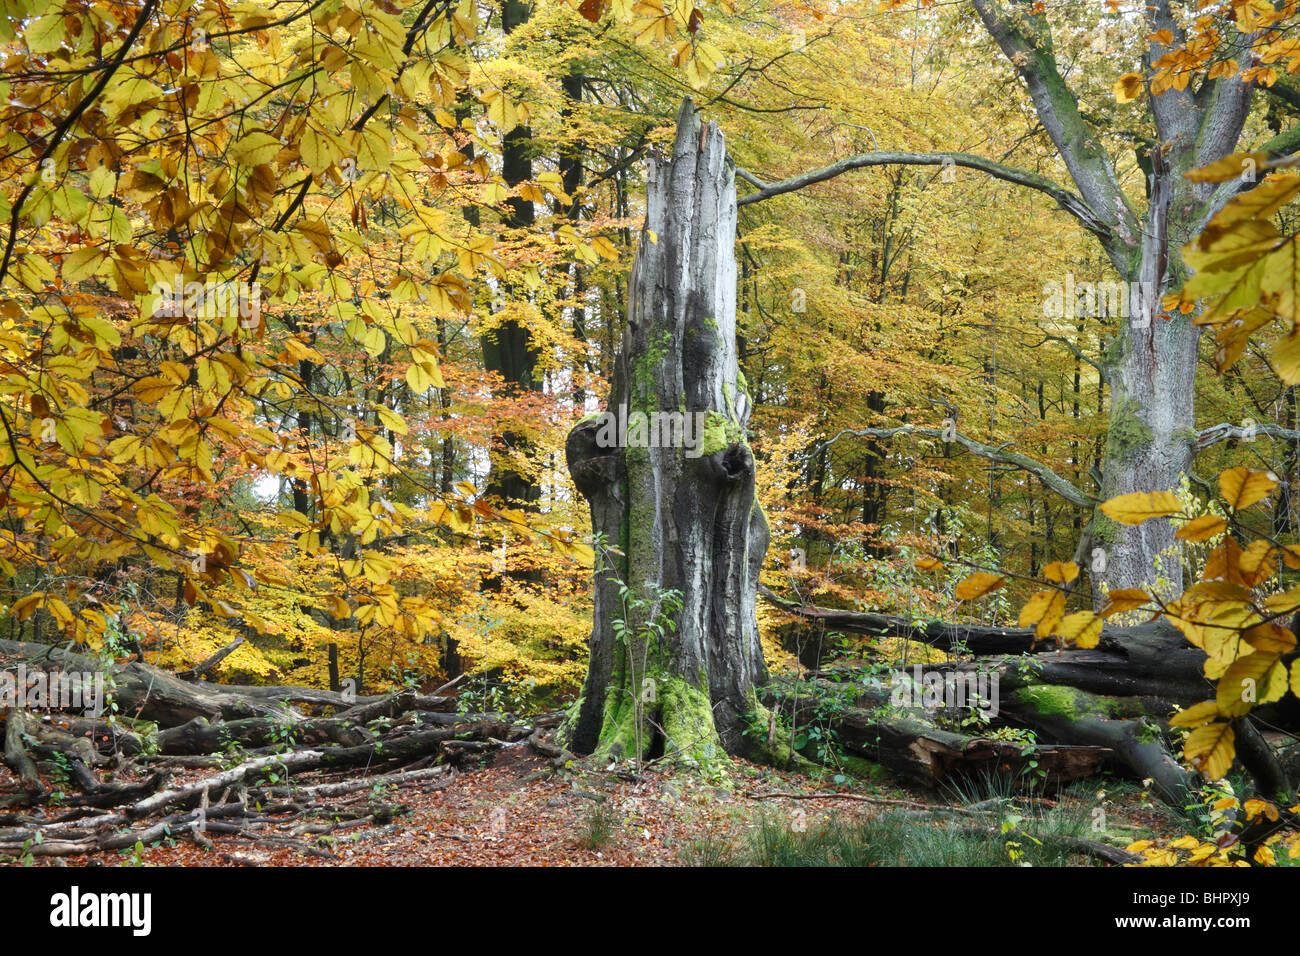 Ancient Forest in autumn, Sababurg National Park, North Hessen, Germany Stock Photo